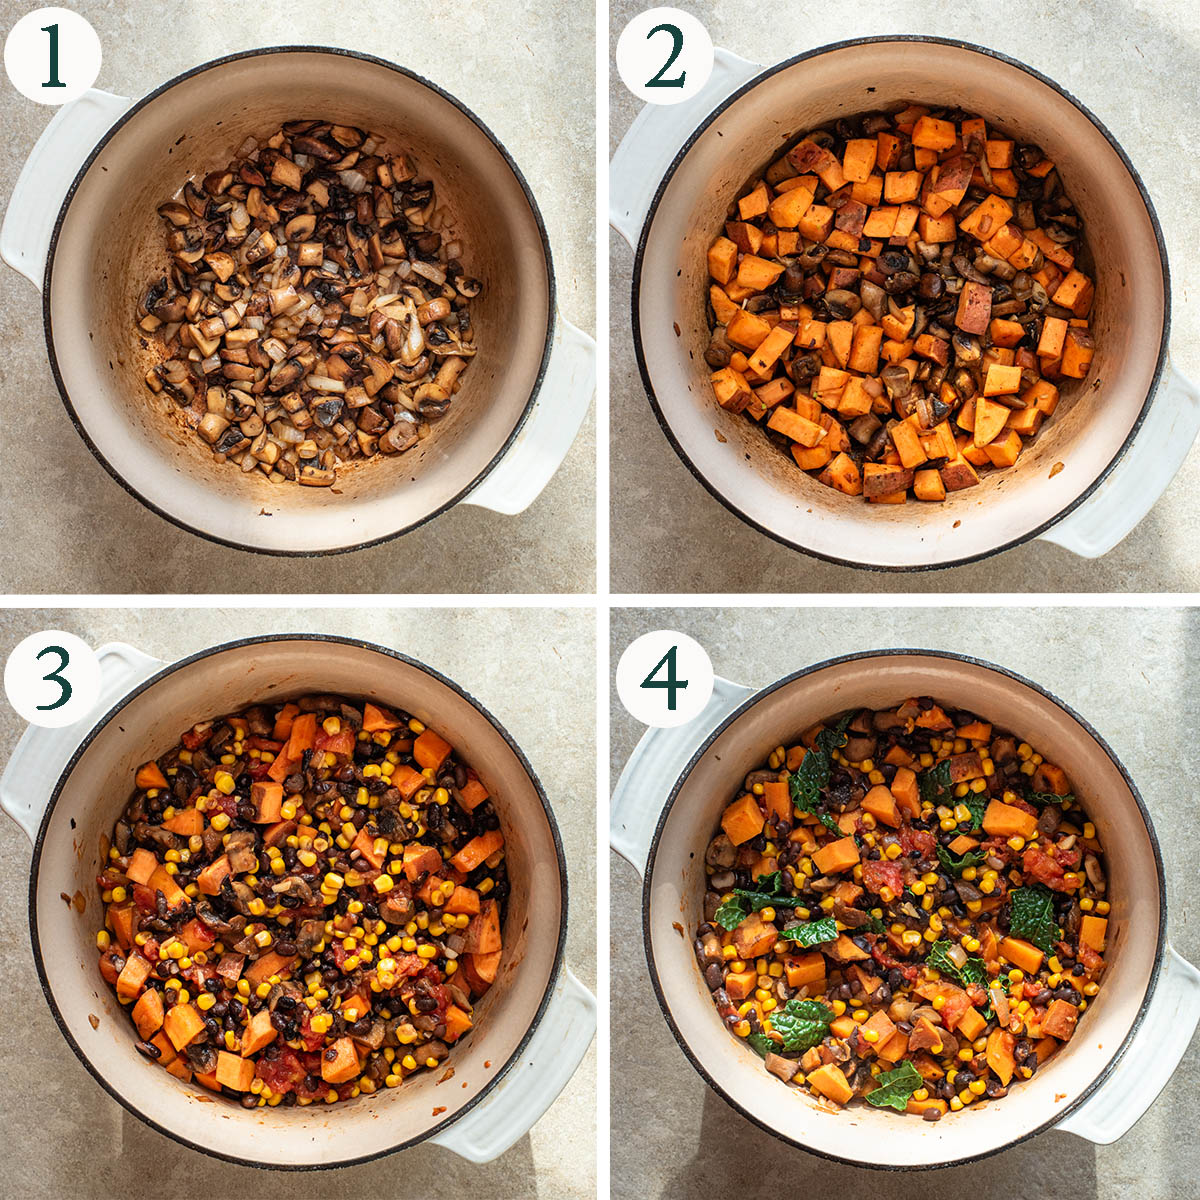 Vegetarian chili steps 1 to 4, searing mushrooms, sweet potato added, and before and after simmering.